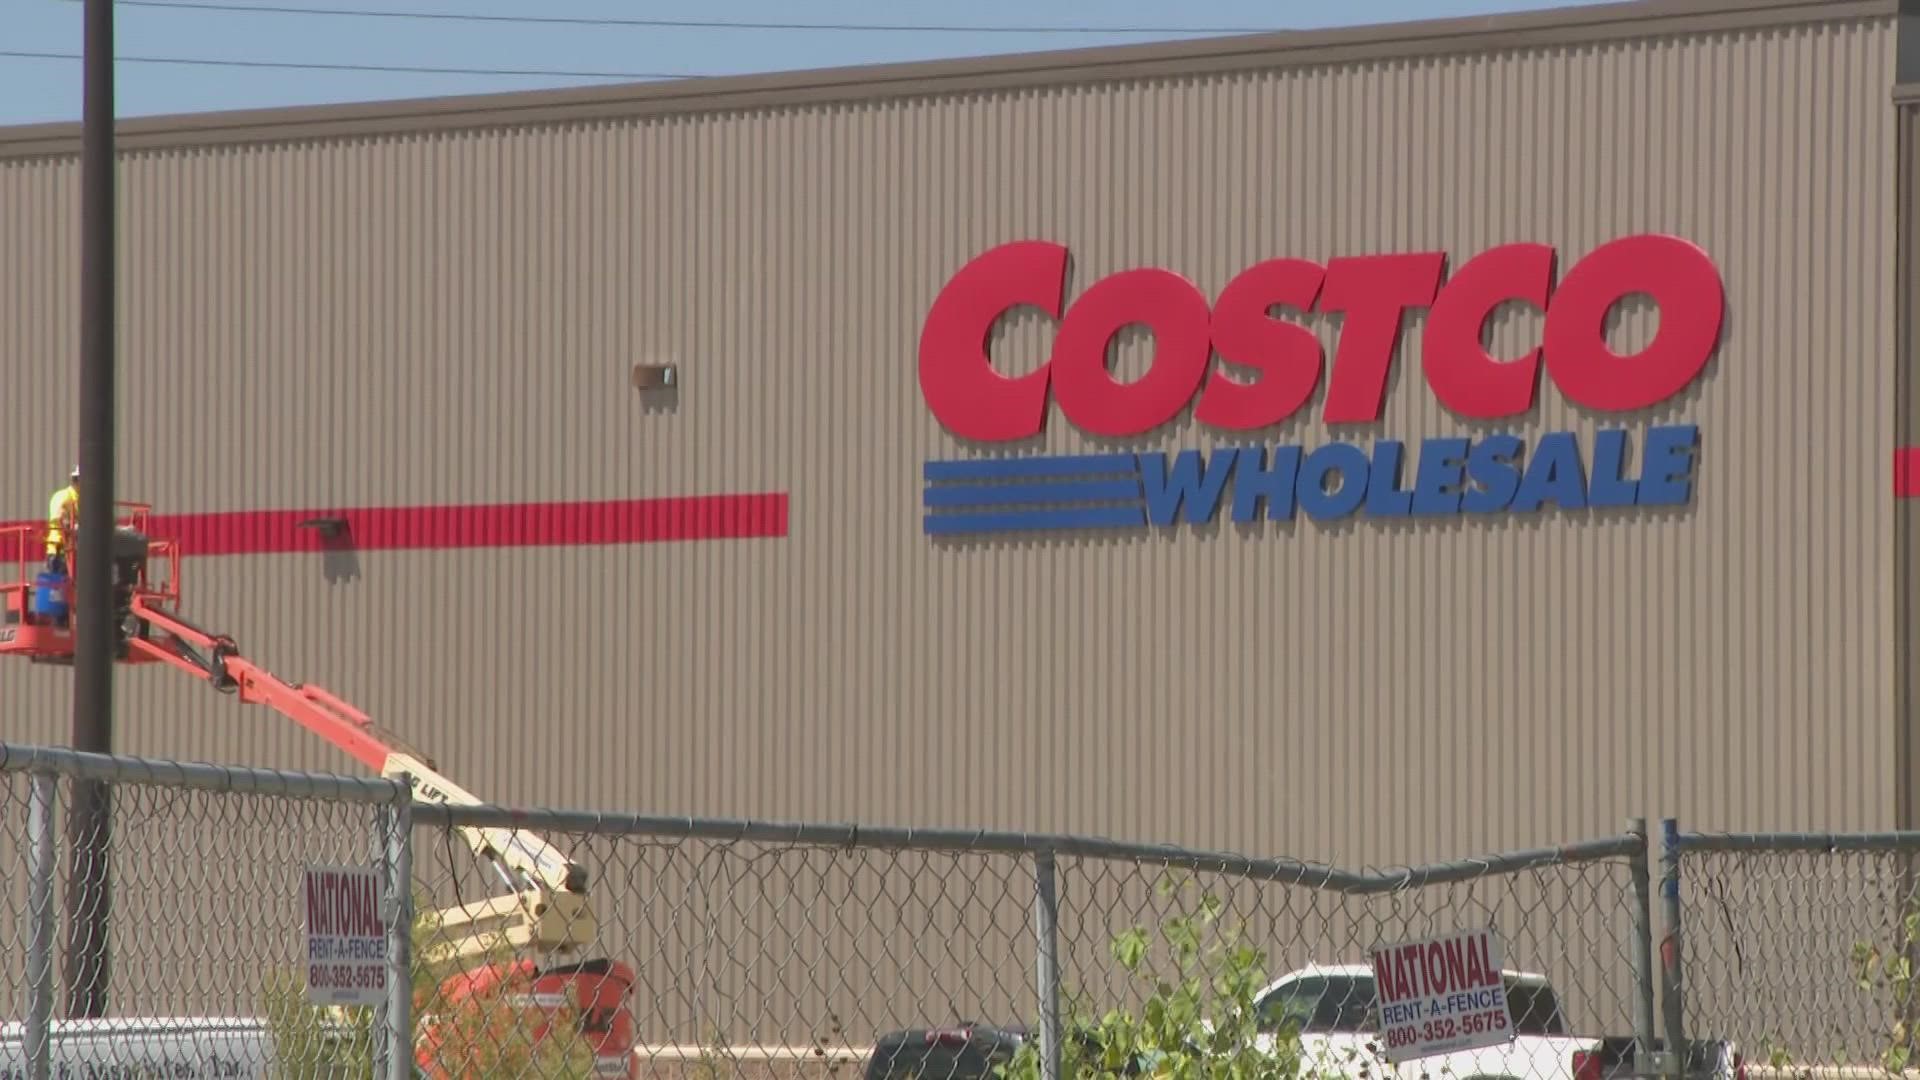 The deadline for some people living near the new Costco development in University City to be out of their homes was Wednesday.